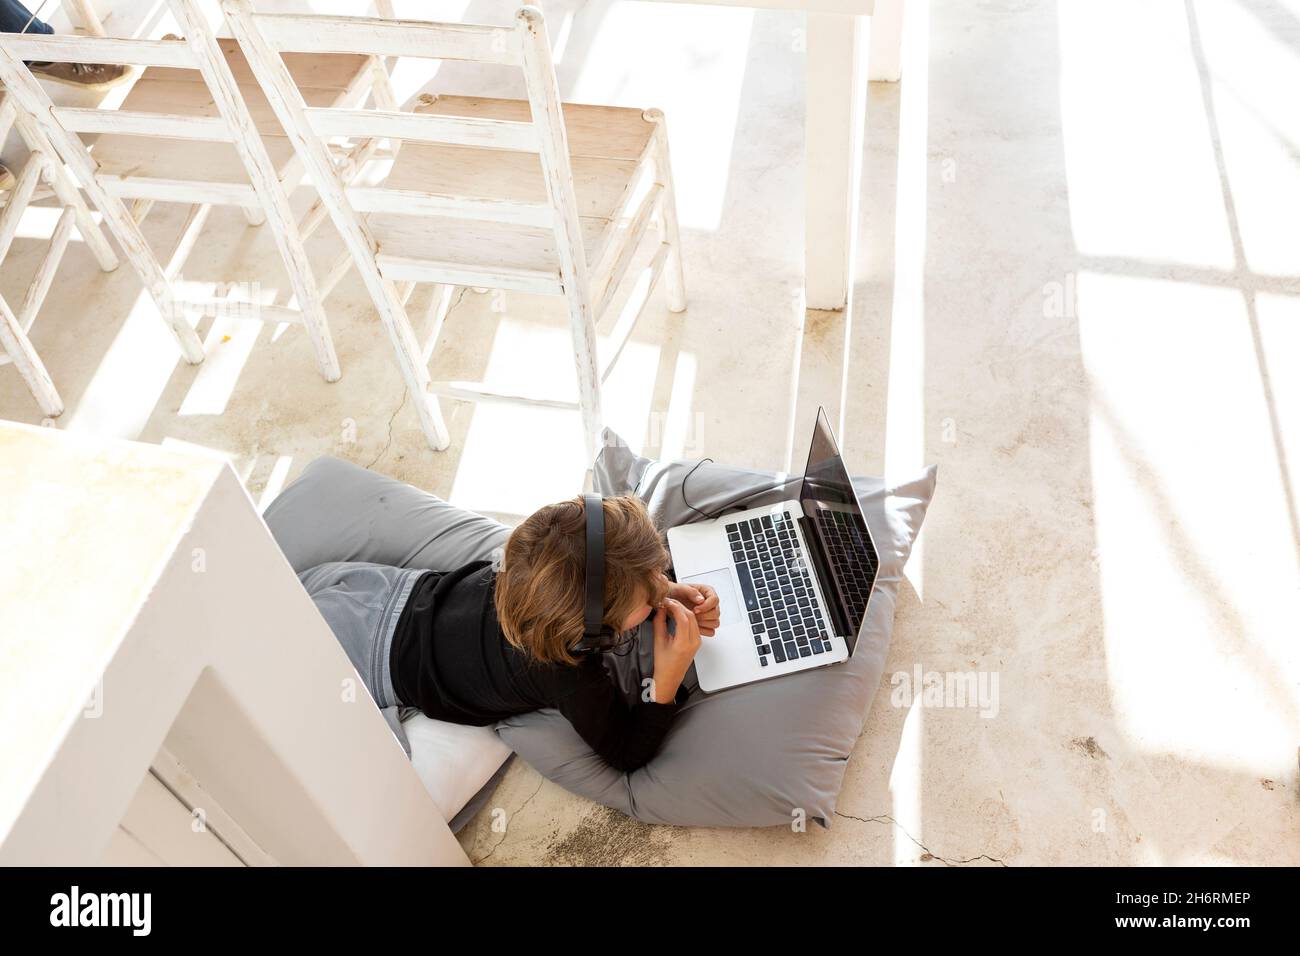 Eight year old boy lying on the floor on cushions using a laptop Stock Photo